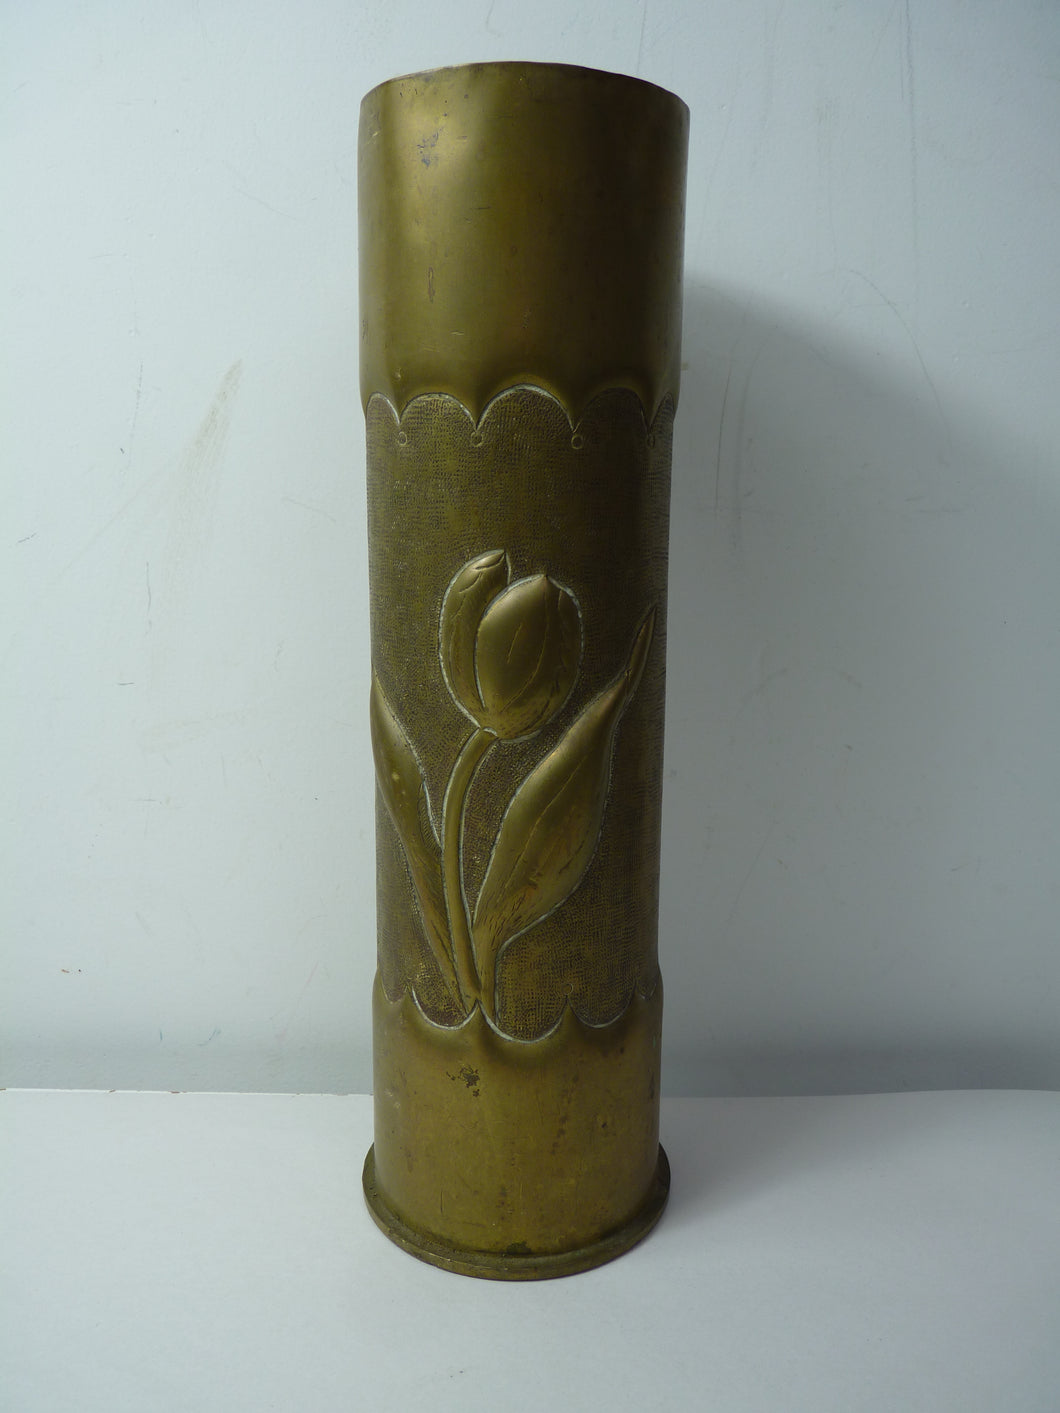 Original WW1 Trench Art Shell Case Vase - 105mm Casing - 1916 Dated